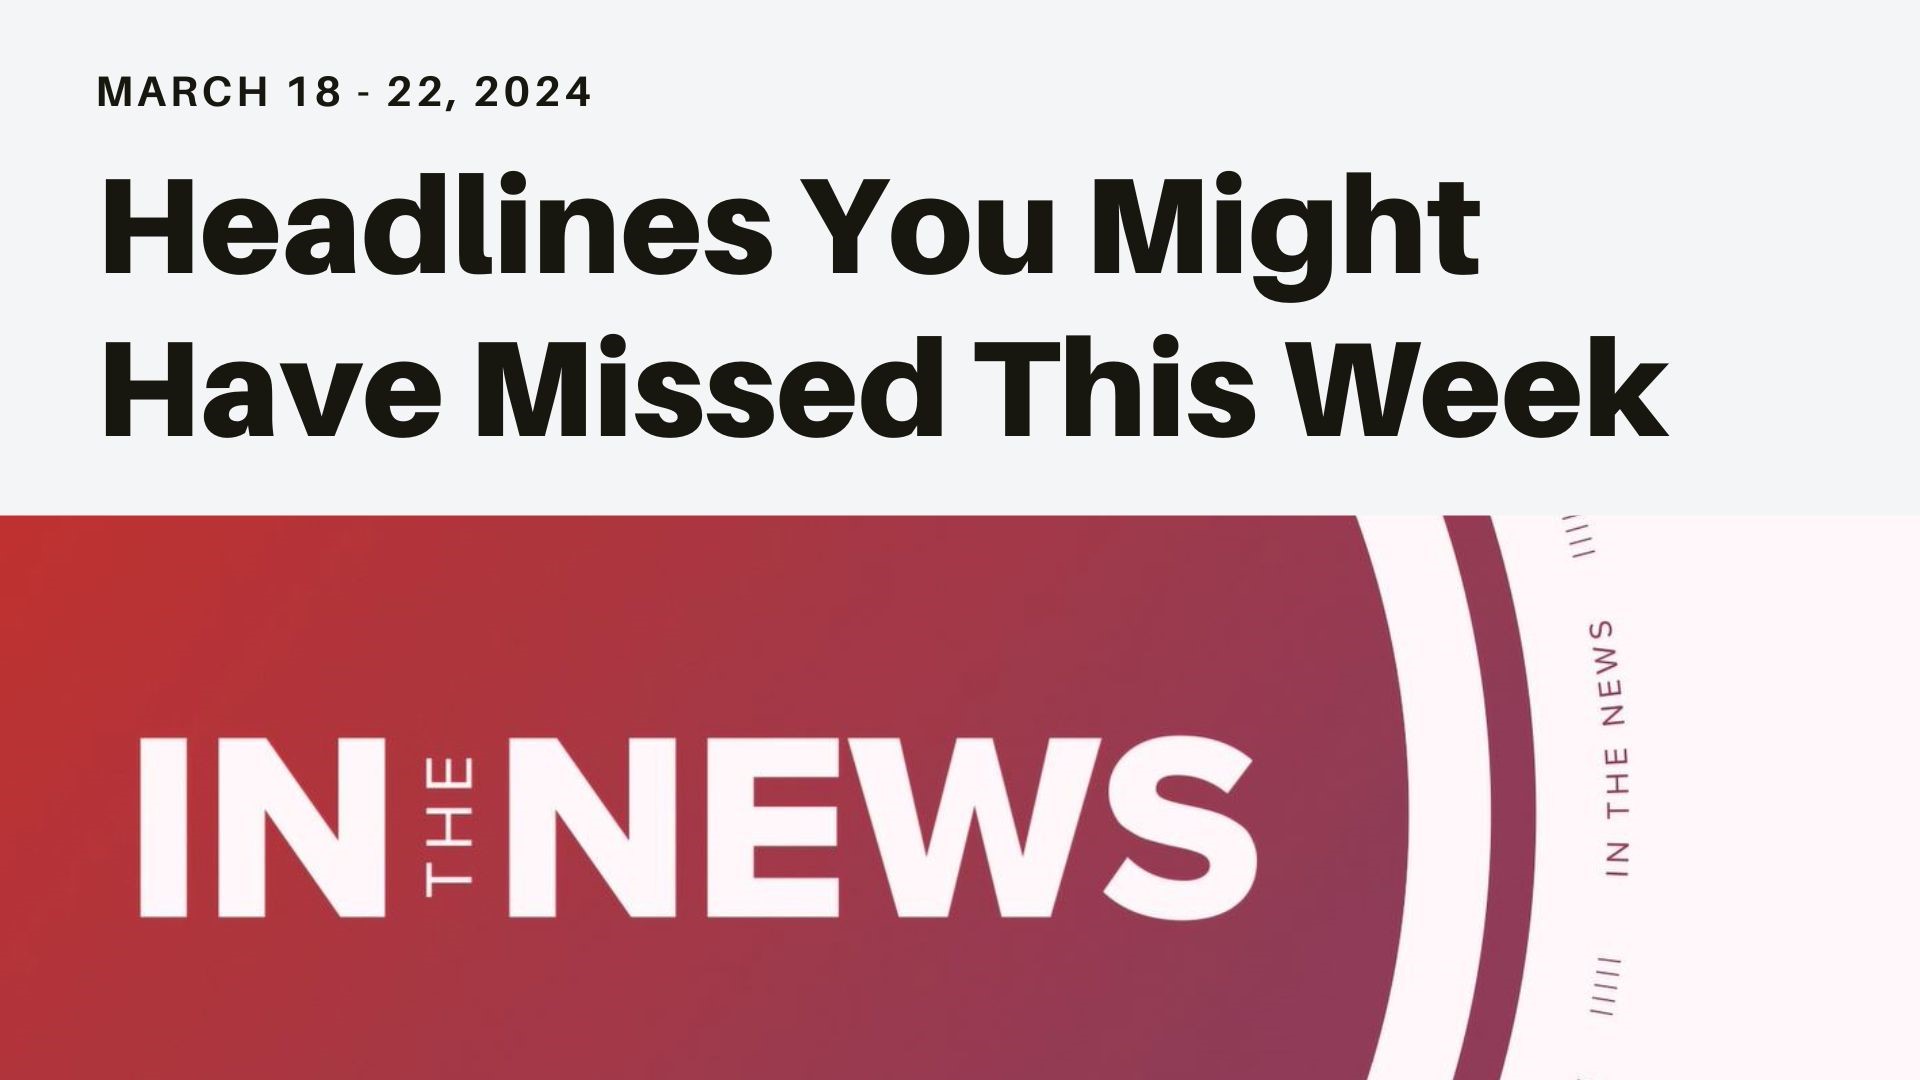 A look at what you might have missed this week from the DOJ suing Apple to measles cases spreading in the U.S. and increased sports betting for March Madness.